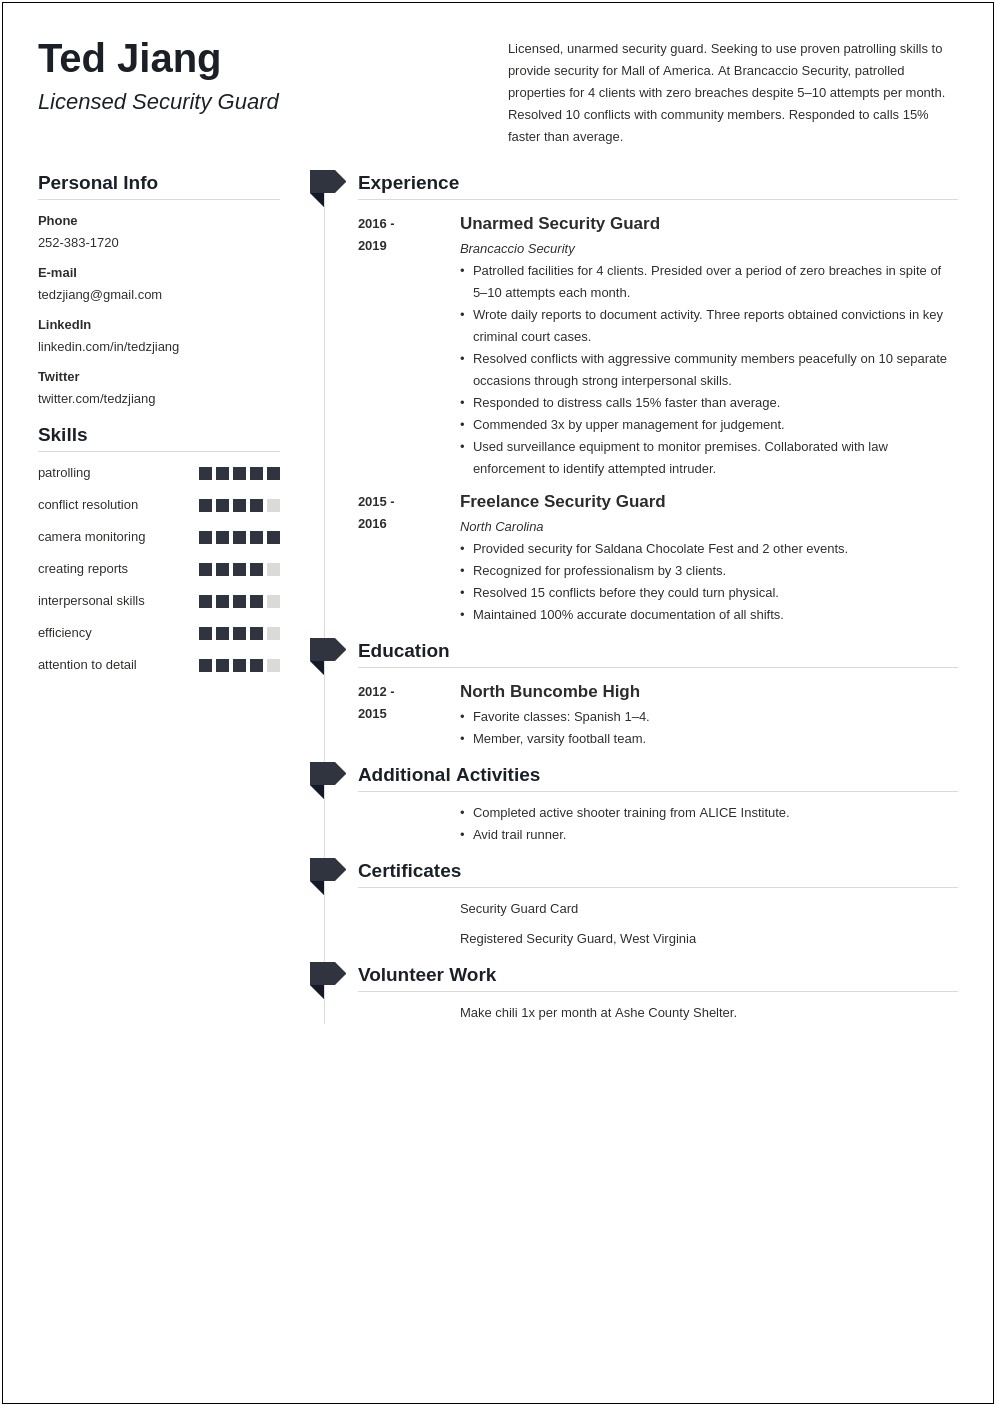 Sample Objective For Security Officer Resume